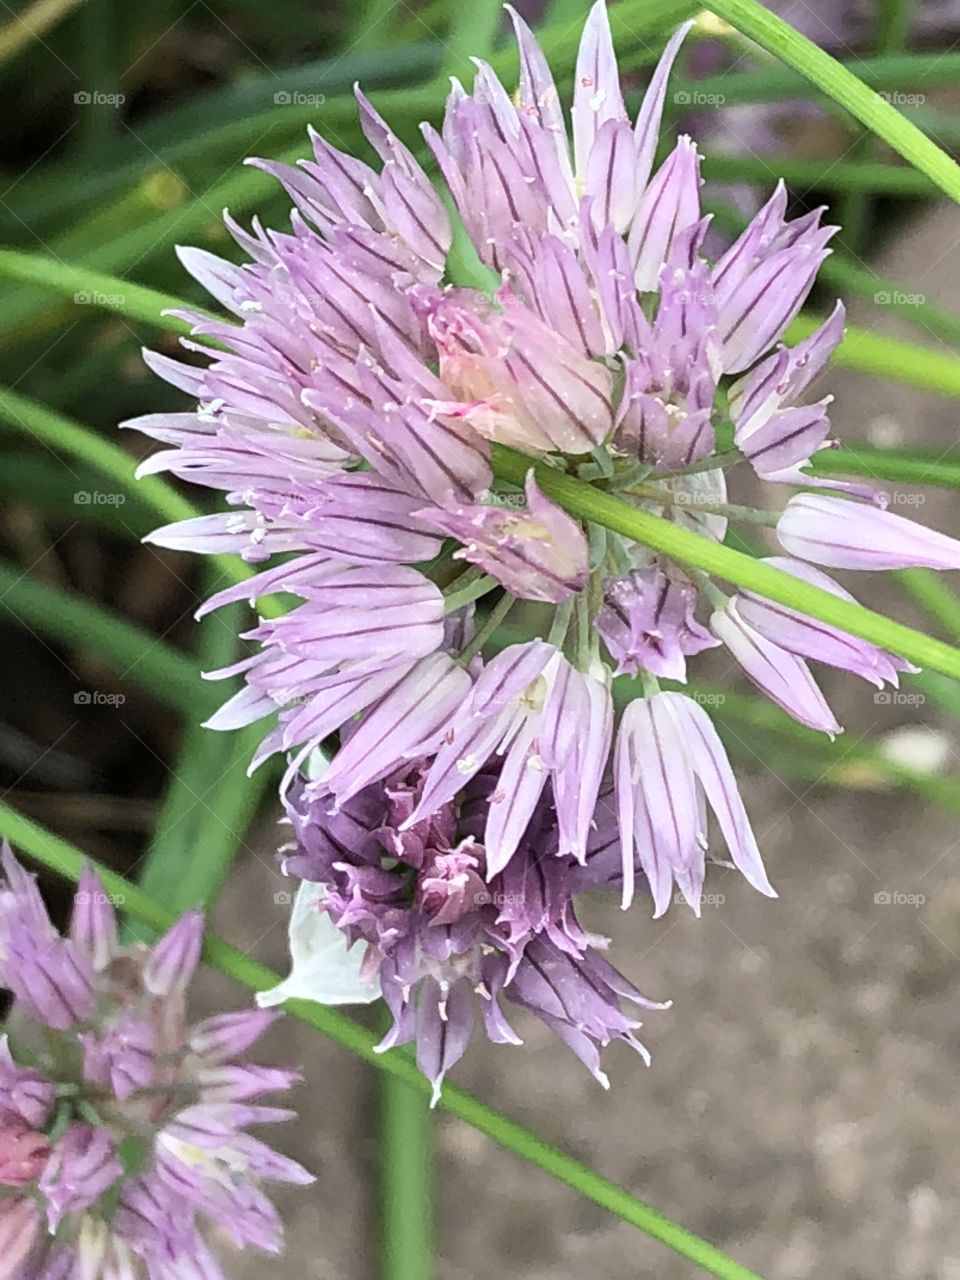 Sometimes I wish I knew more about botany or took better notes when I took a picture of this gorgeous flower. I’d love to be able to identify it for you! 